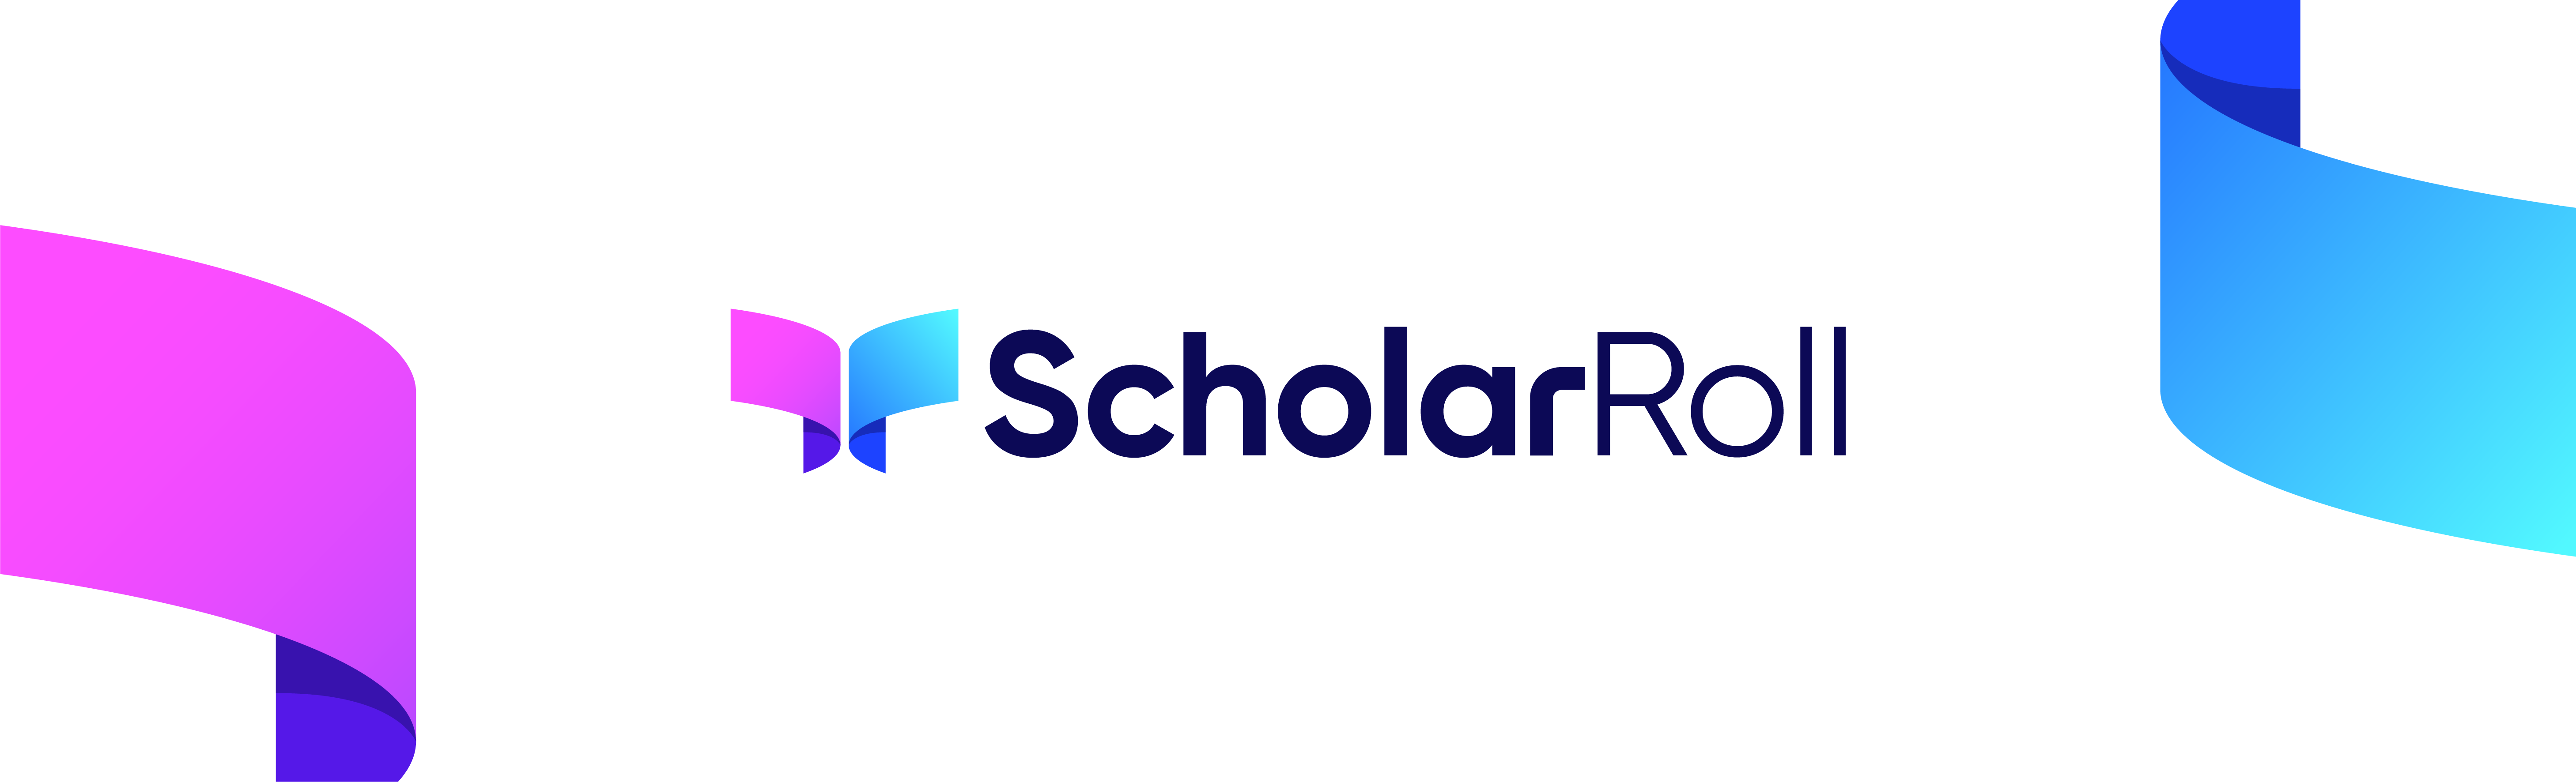 startuptile ScholarRoll-BankRoll your higher education for free